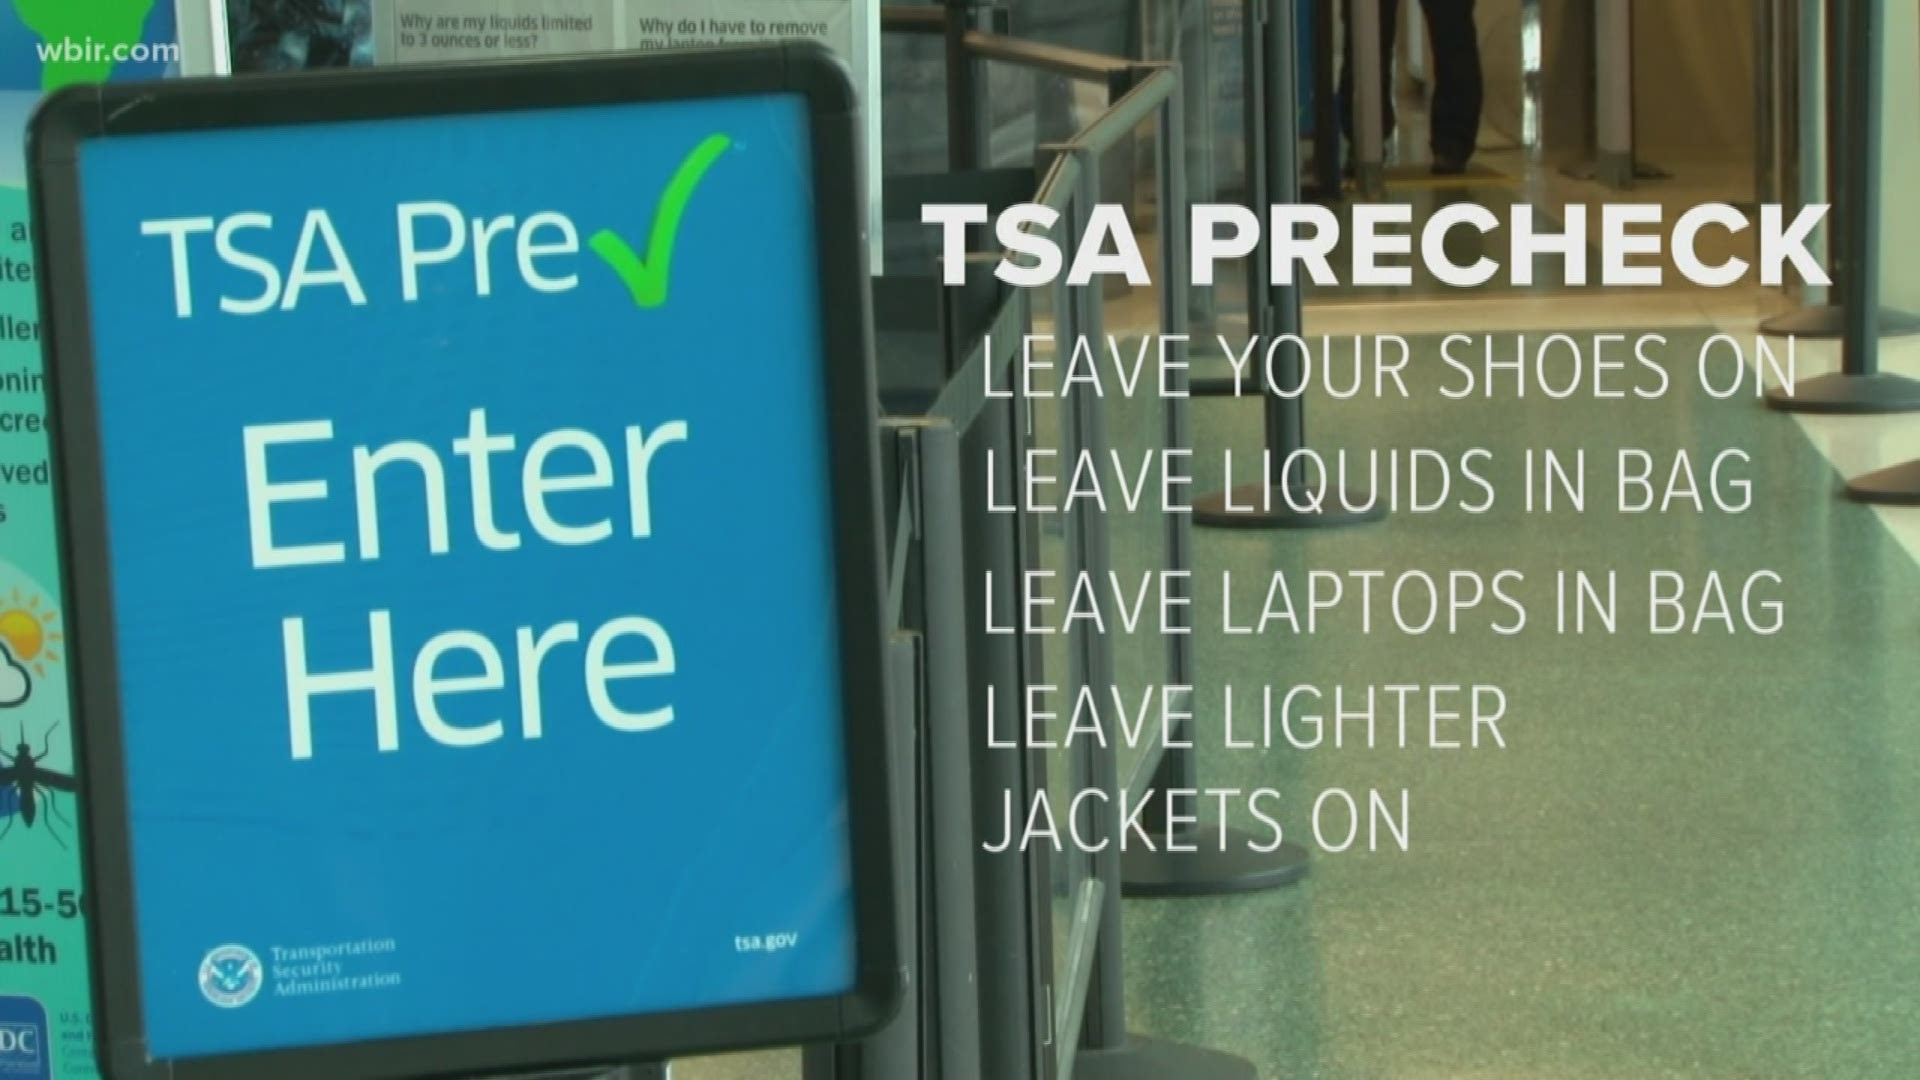 The TSA PreCheck program allows travelers to go through an expedited screening process to minimize their time standing in line.